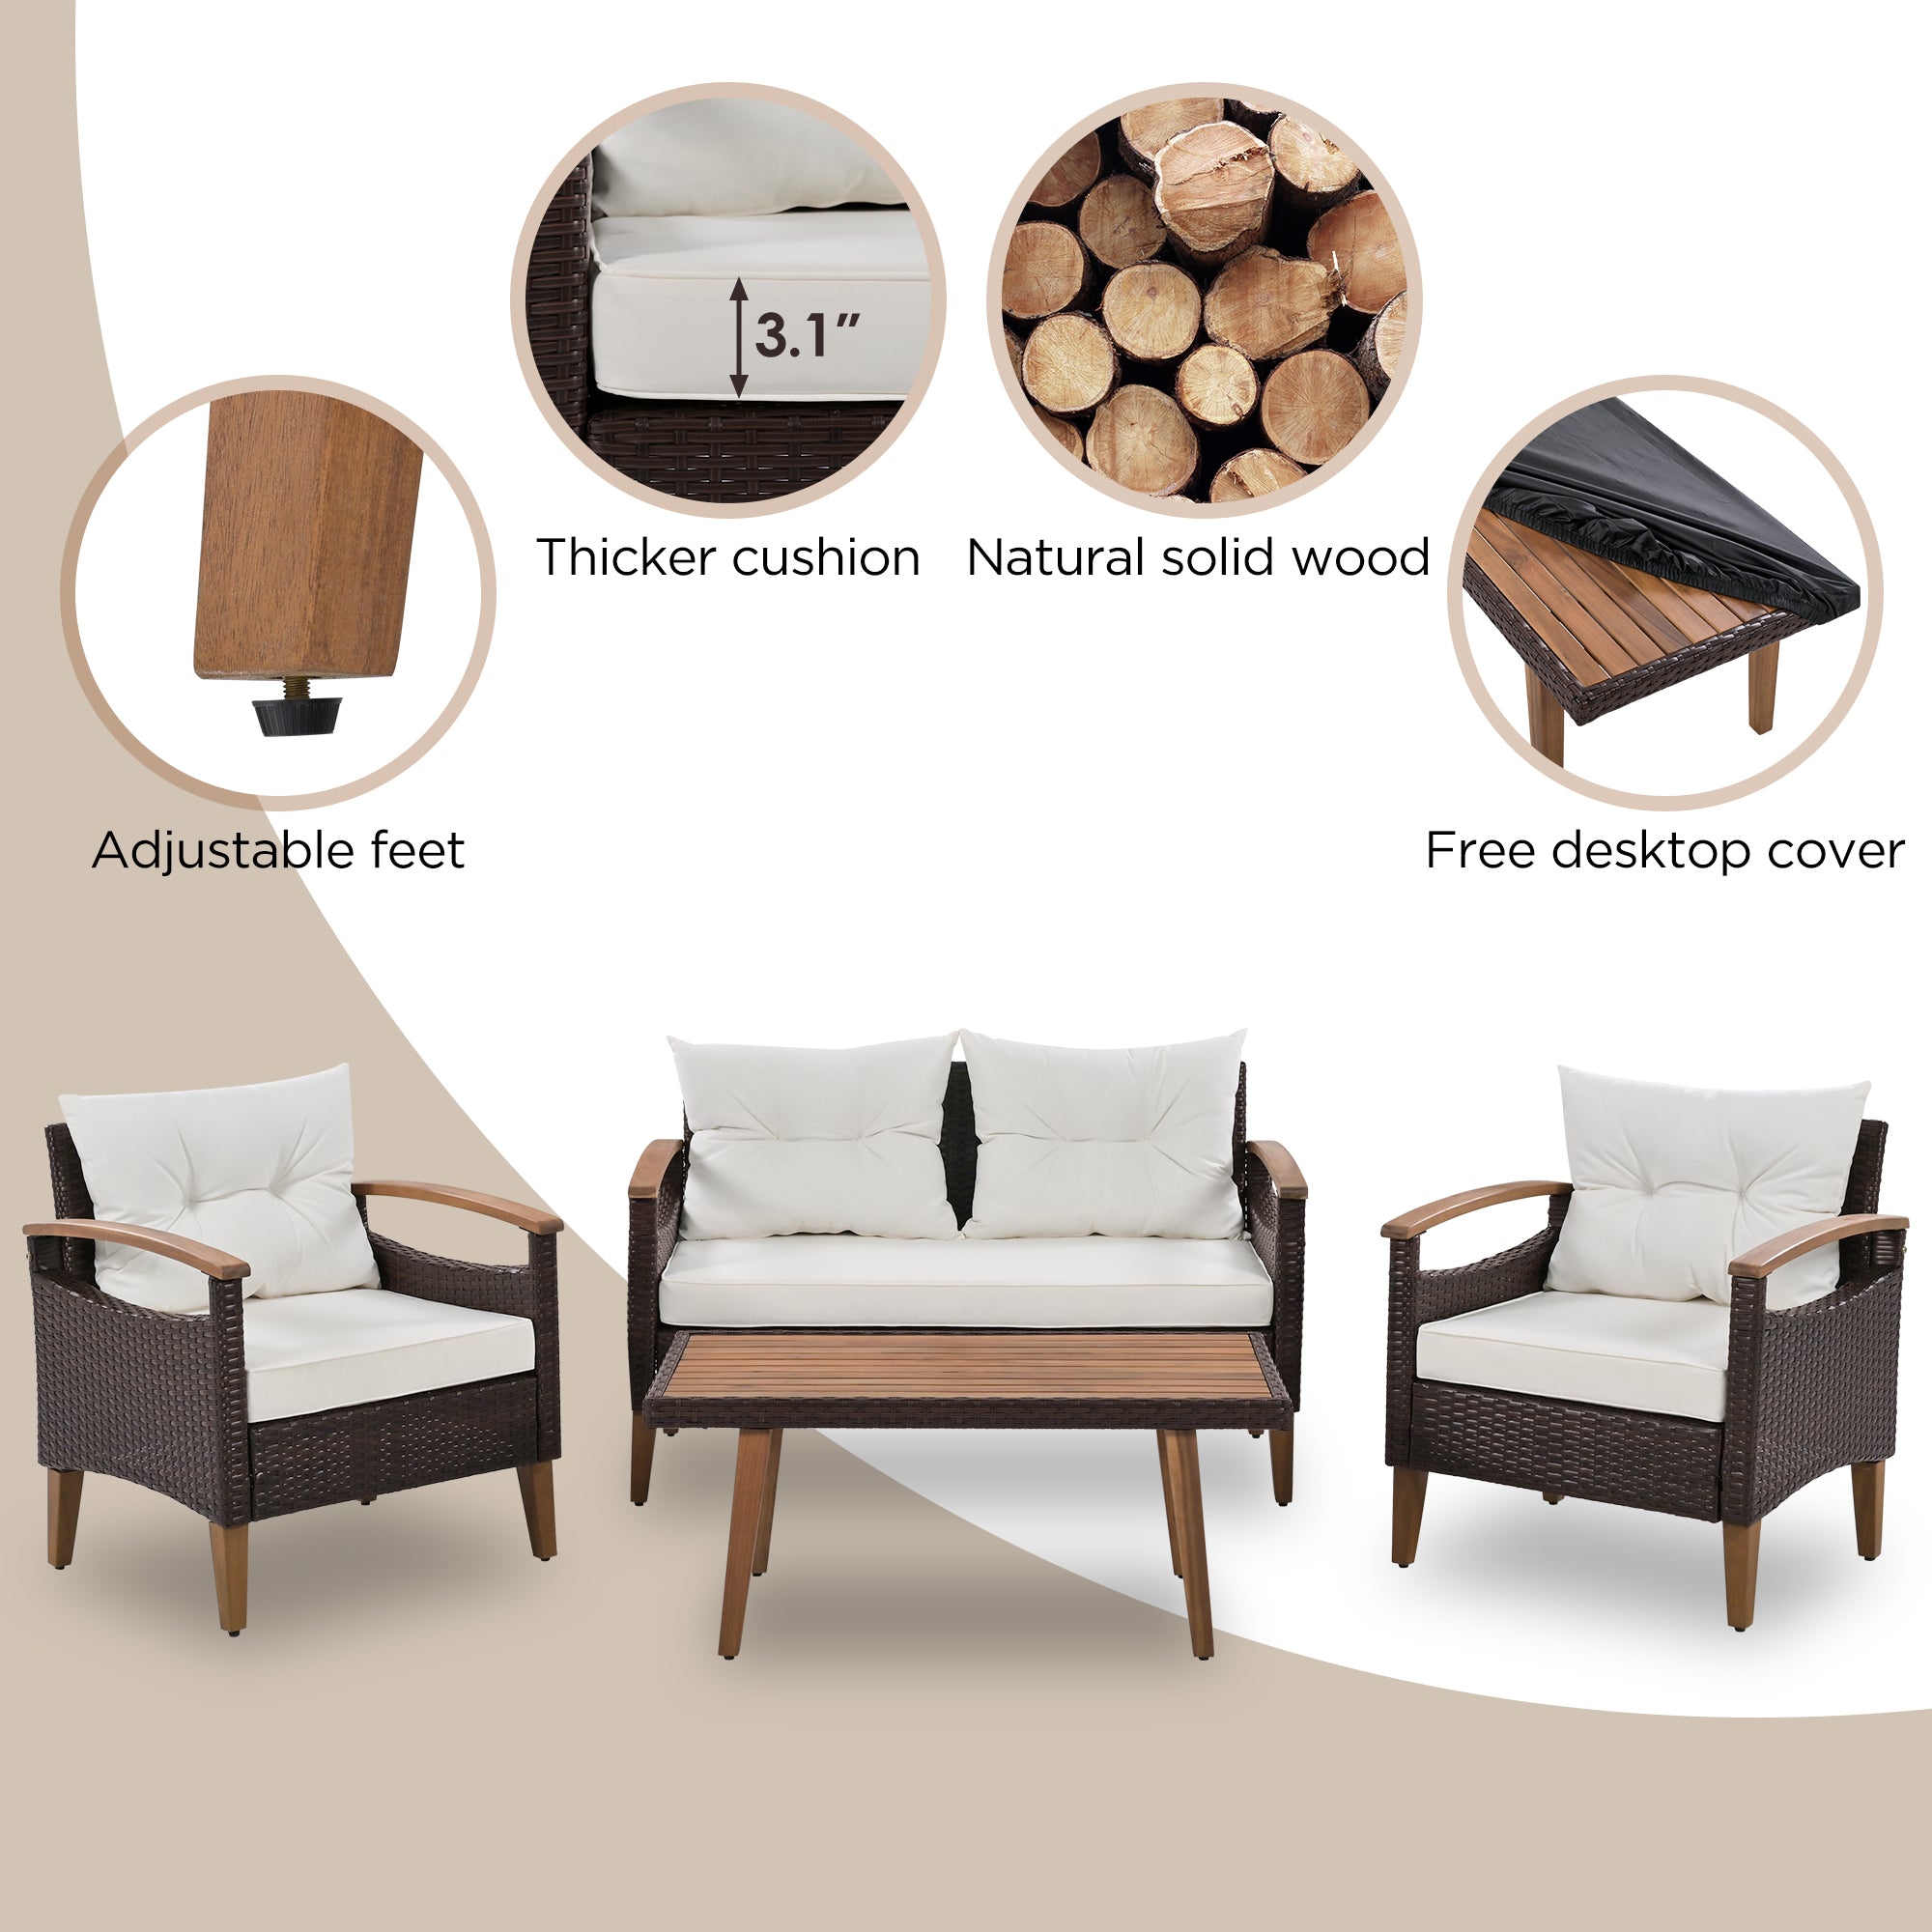 4-Piece Garden Furniture,  Patio Seating Set, PE Rattan Outdoor Sofa Set, Wood Table and Legs - Brown and Beige